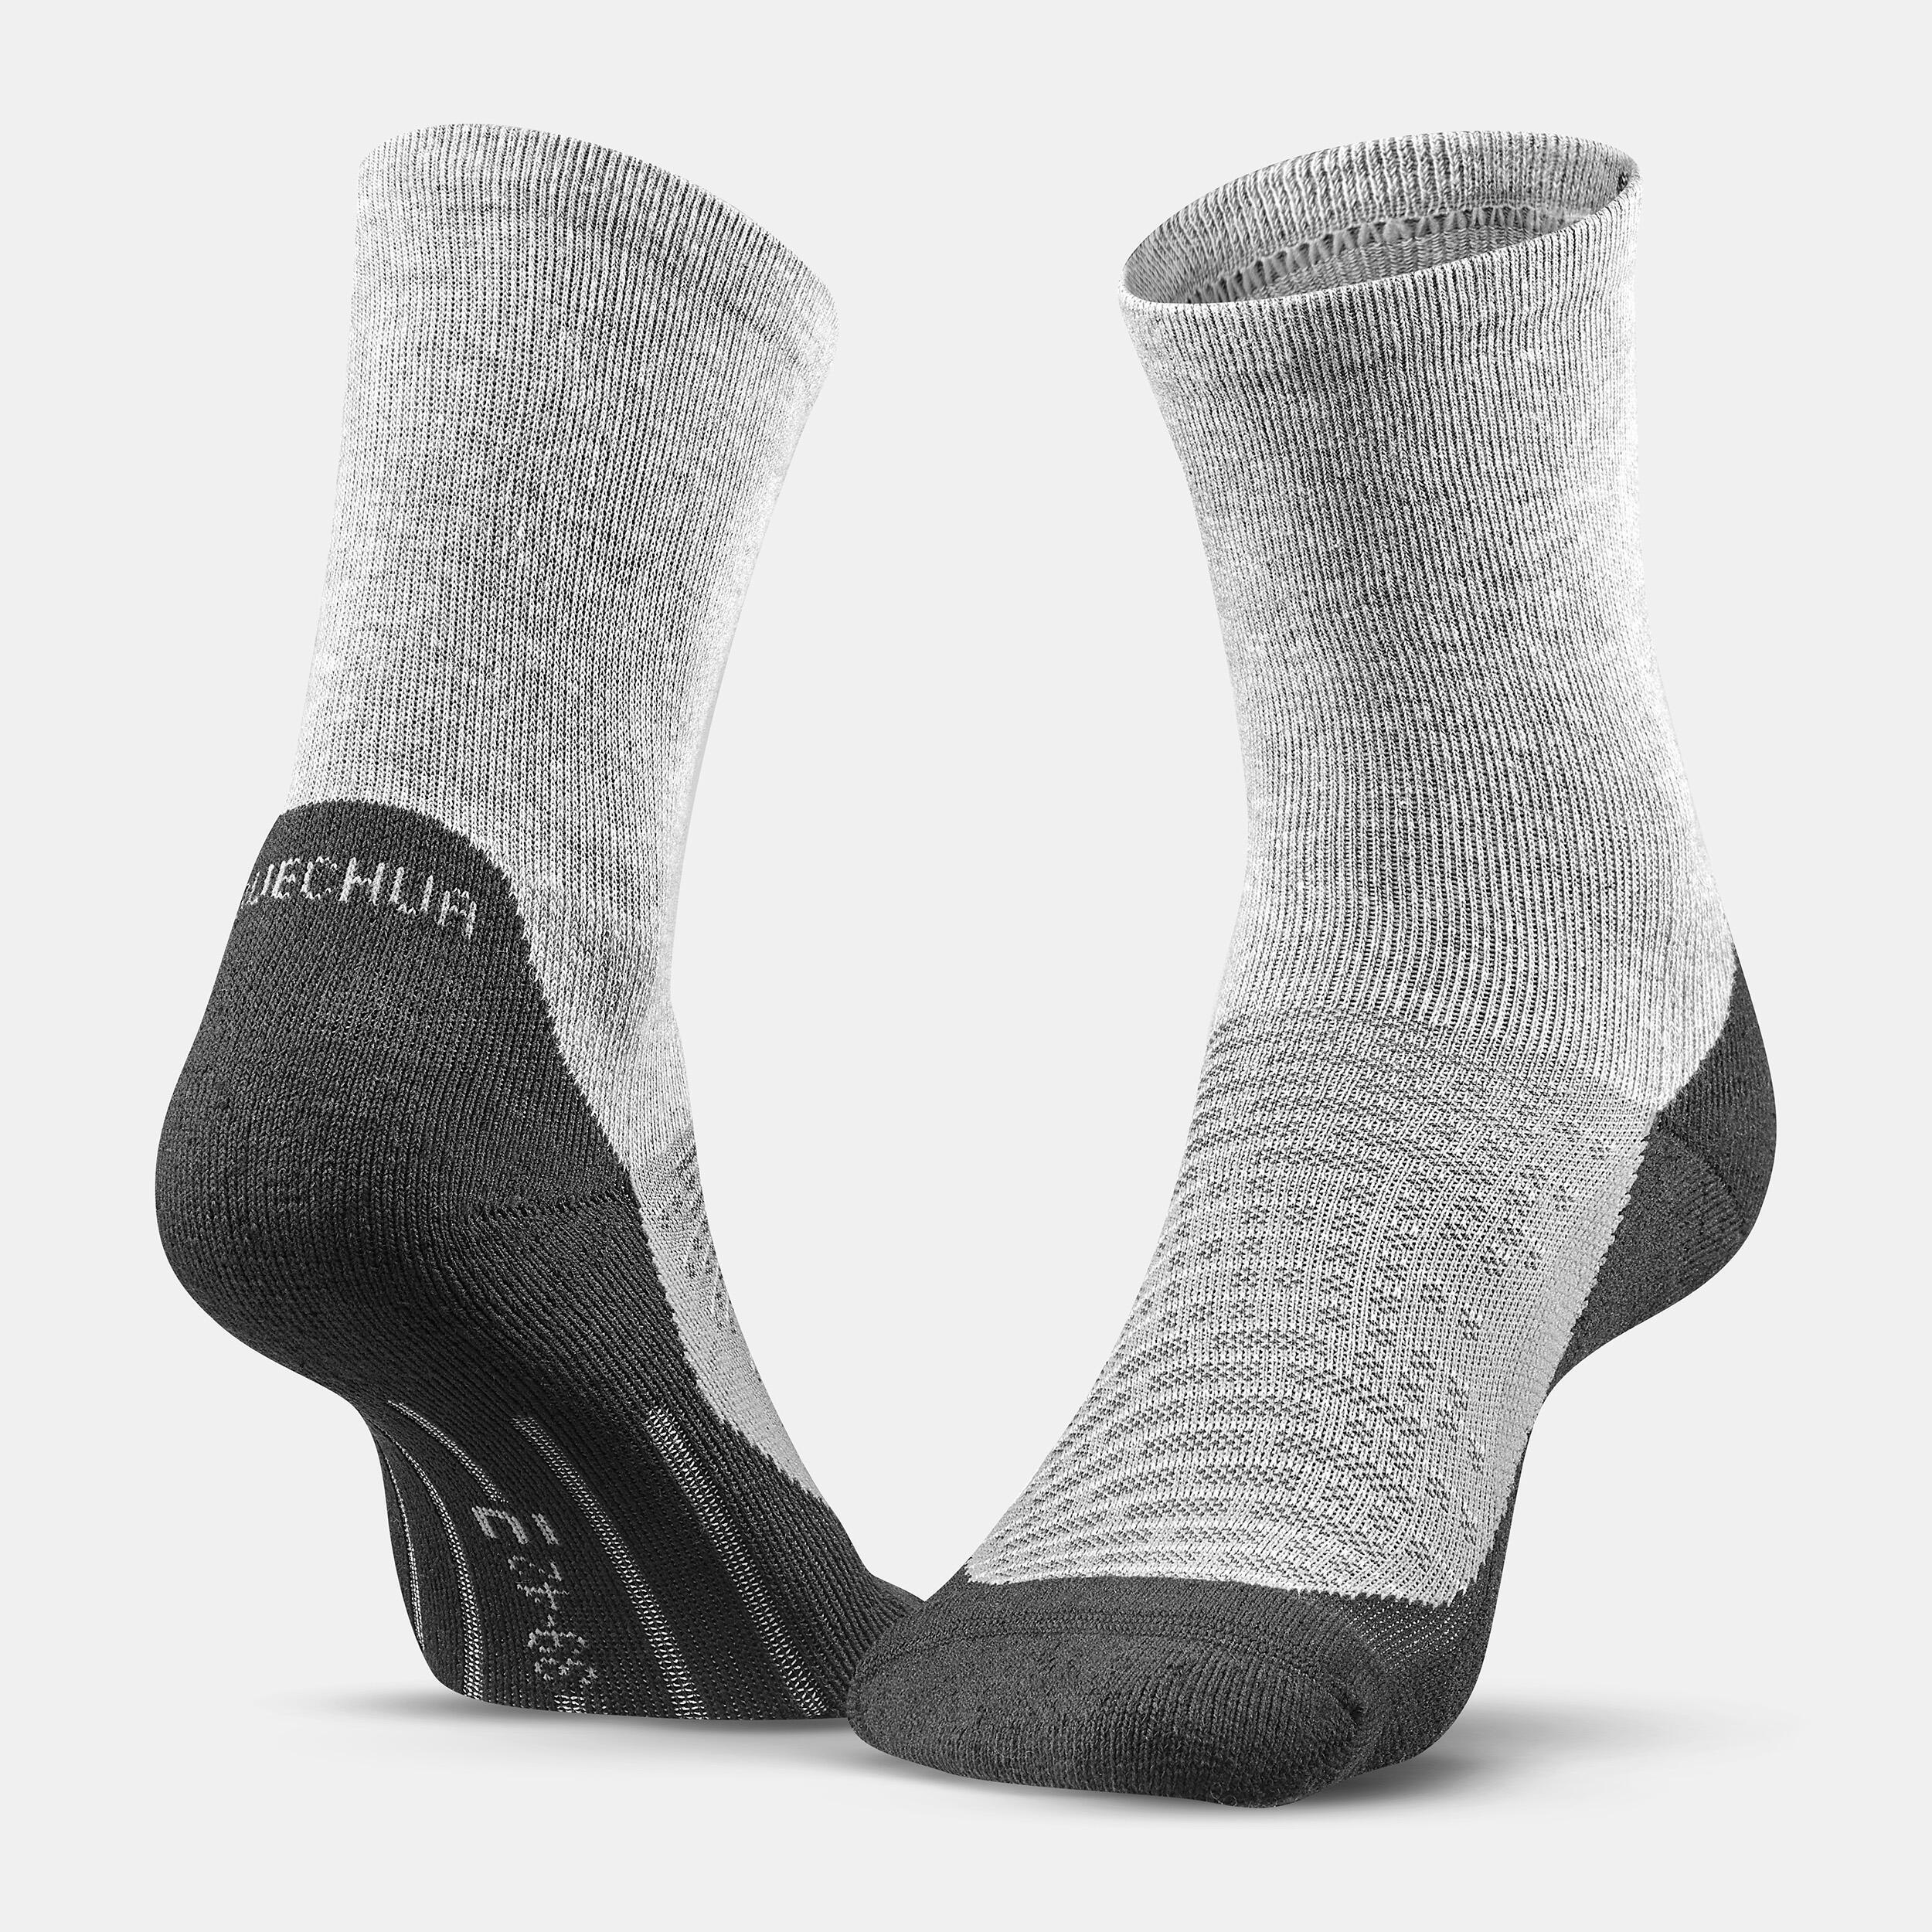 Sock Hike 100 High  - Pack of 2 pairs - Grey and Blue 2/9